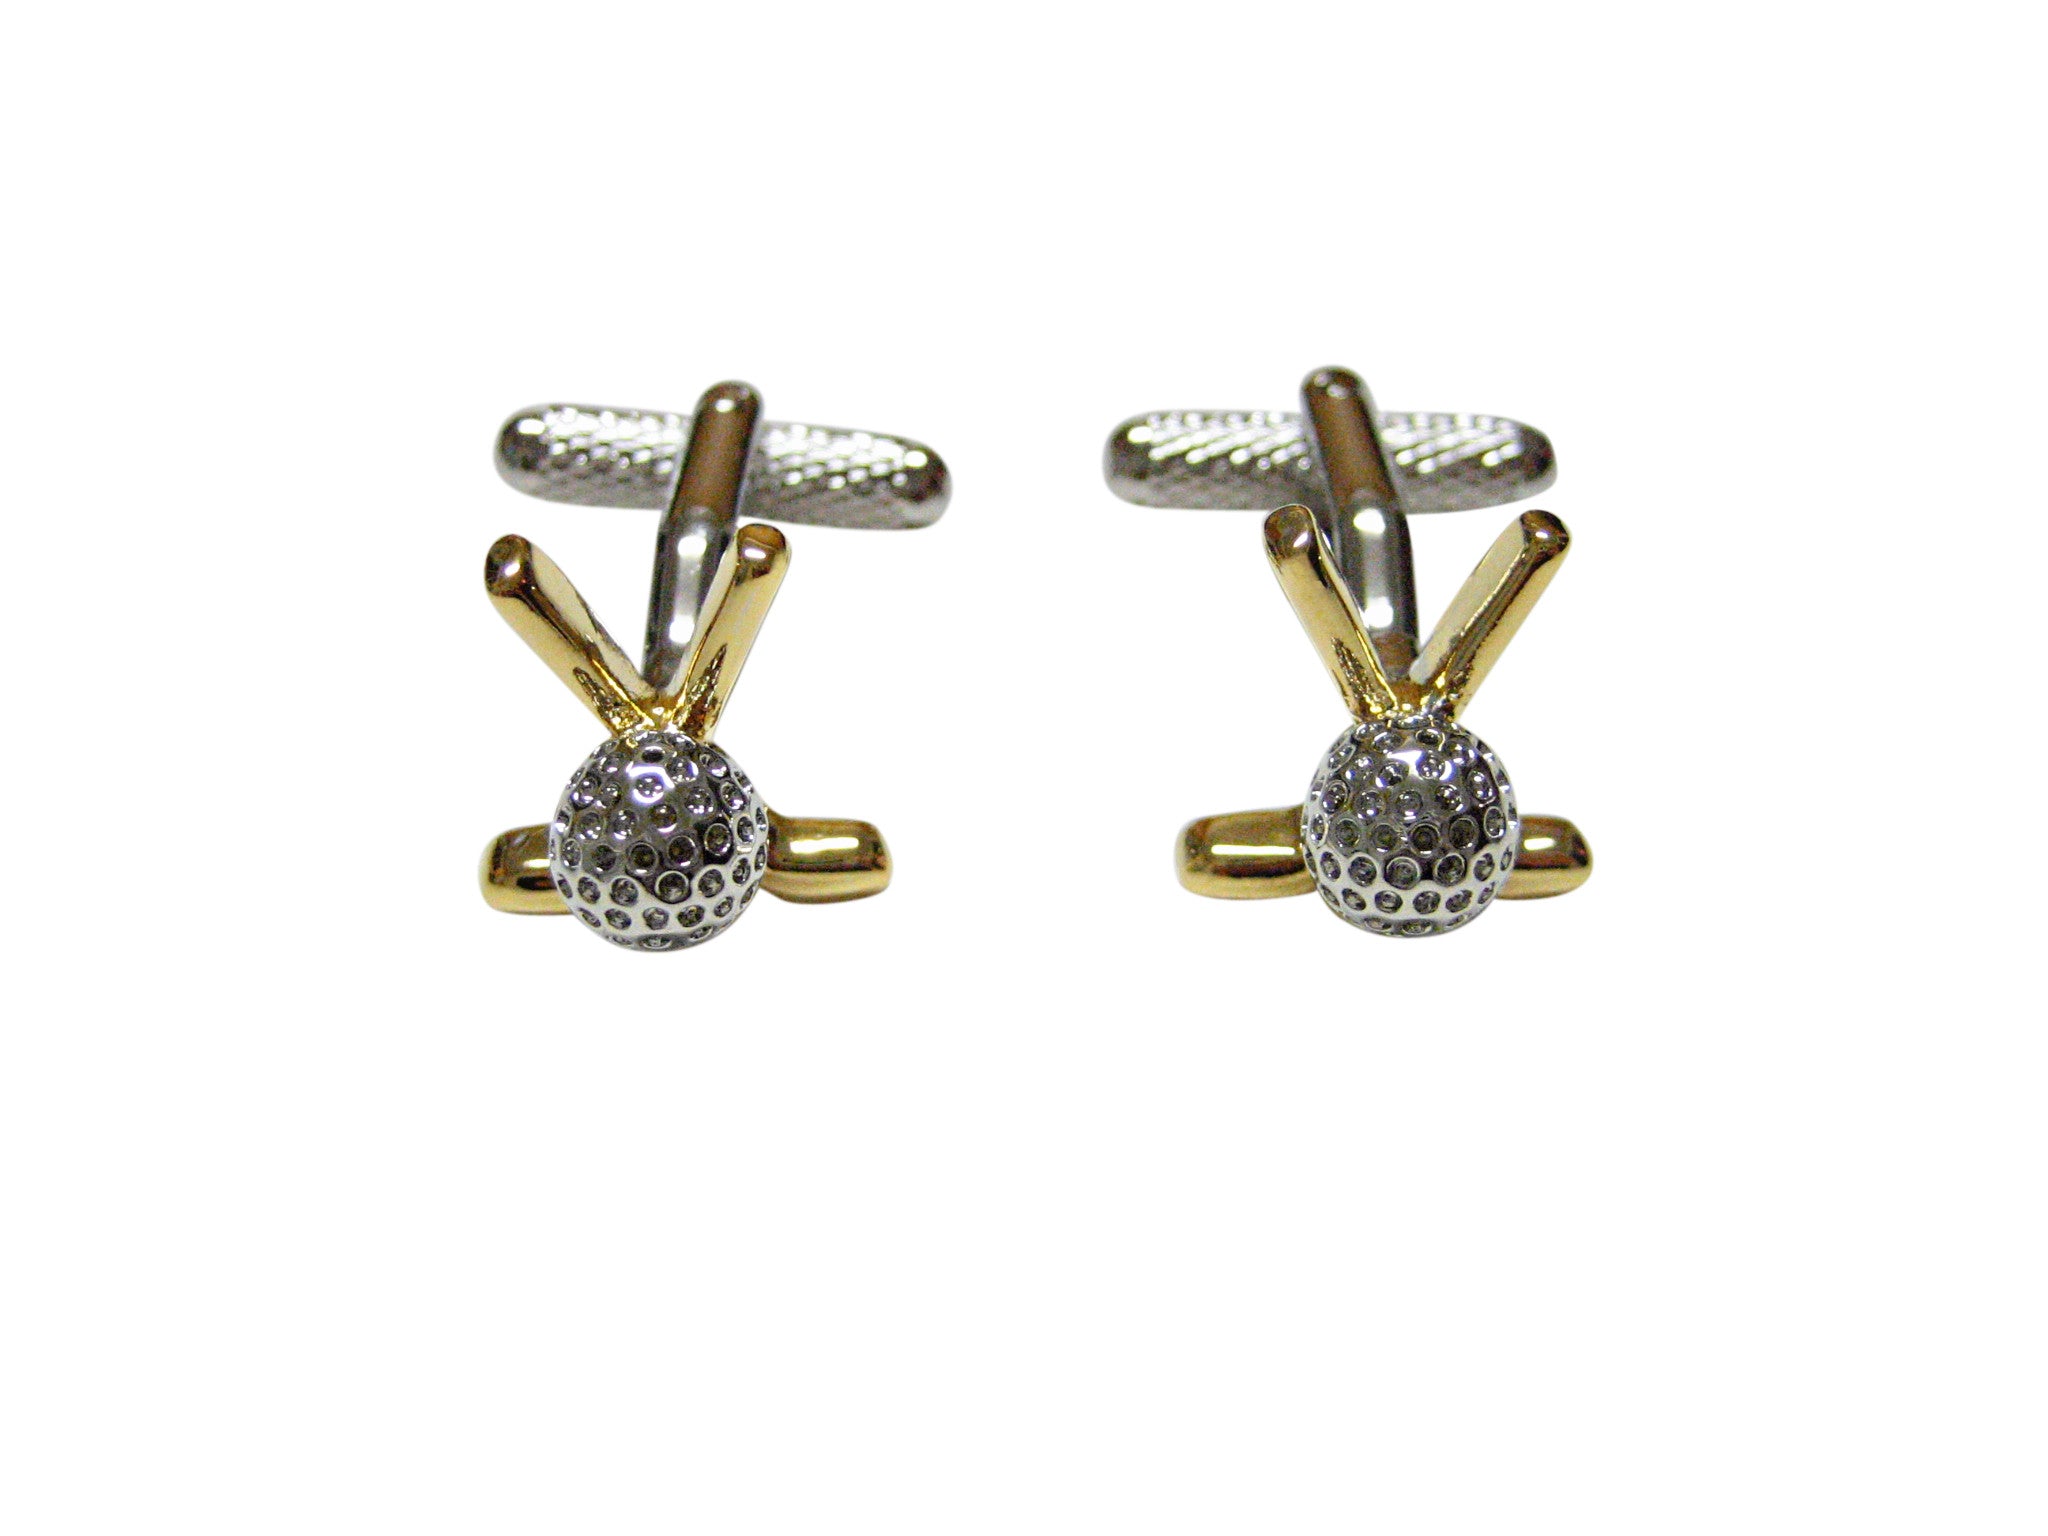 Gold and Silver Toned Golf Clubs and Ball Cufflinks